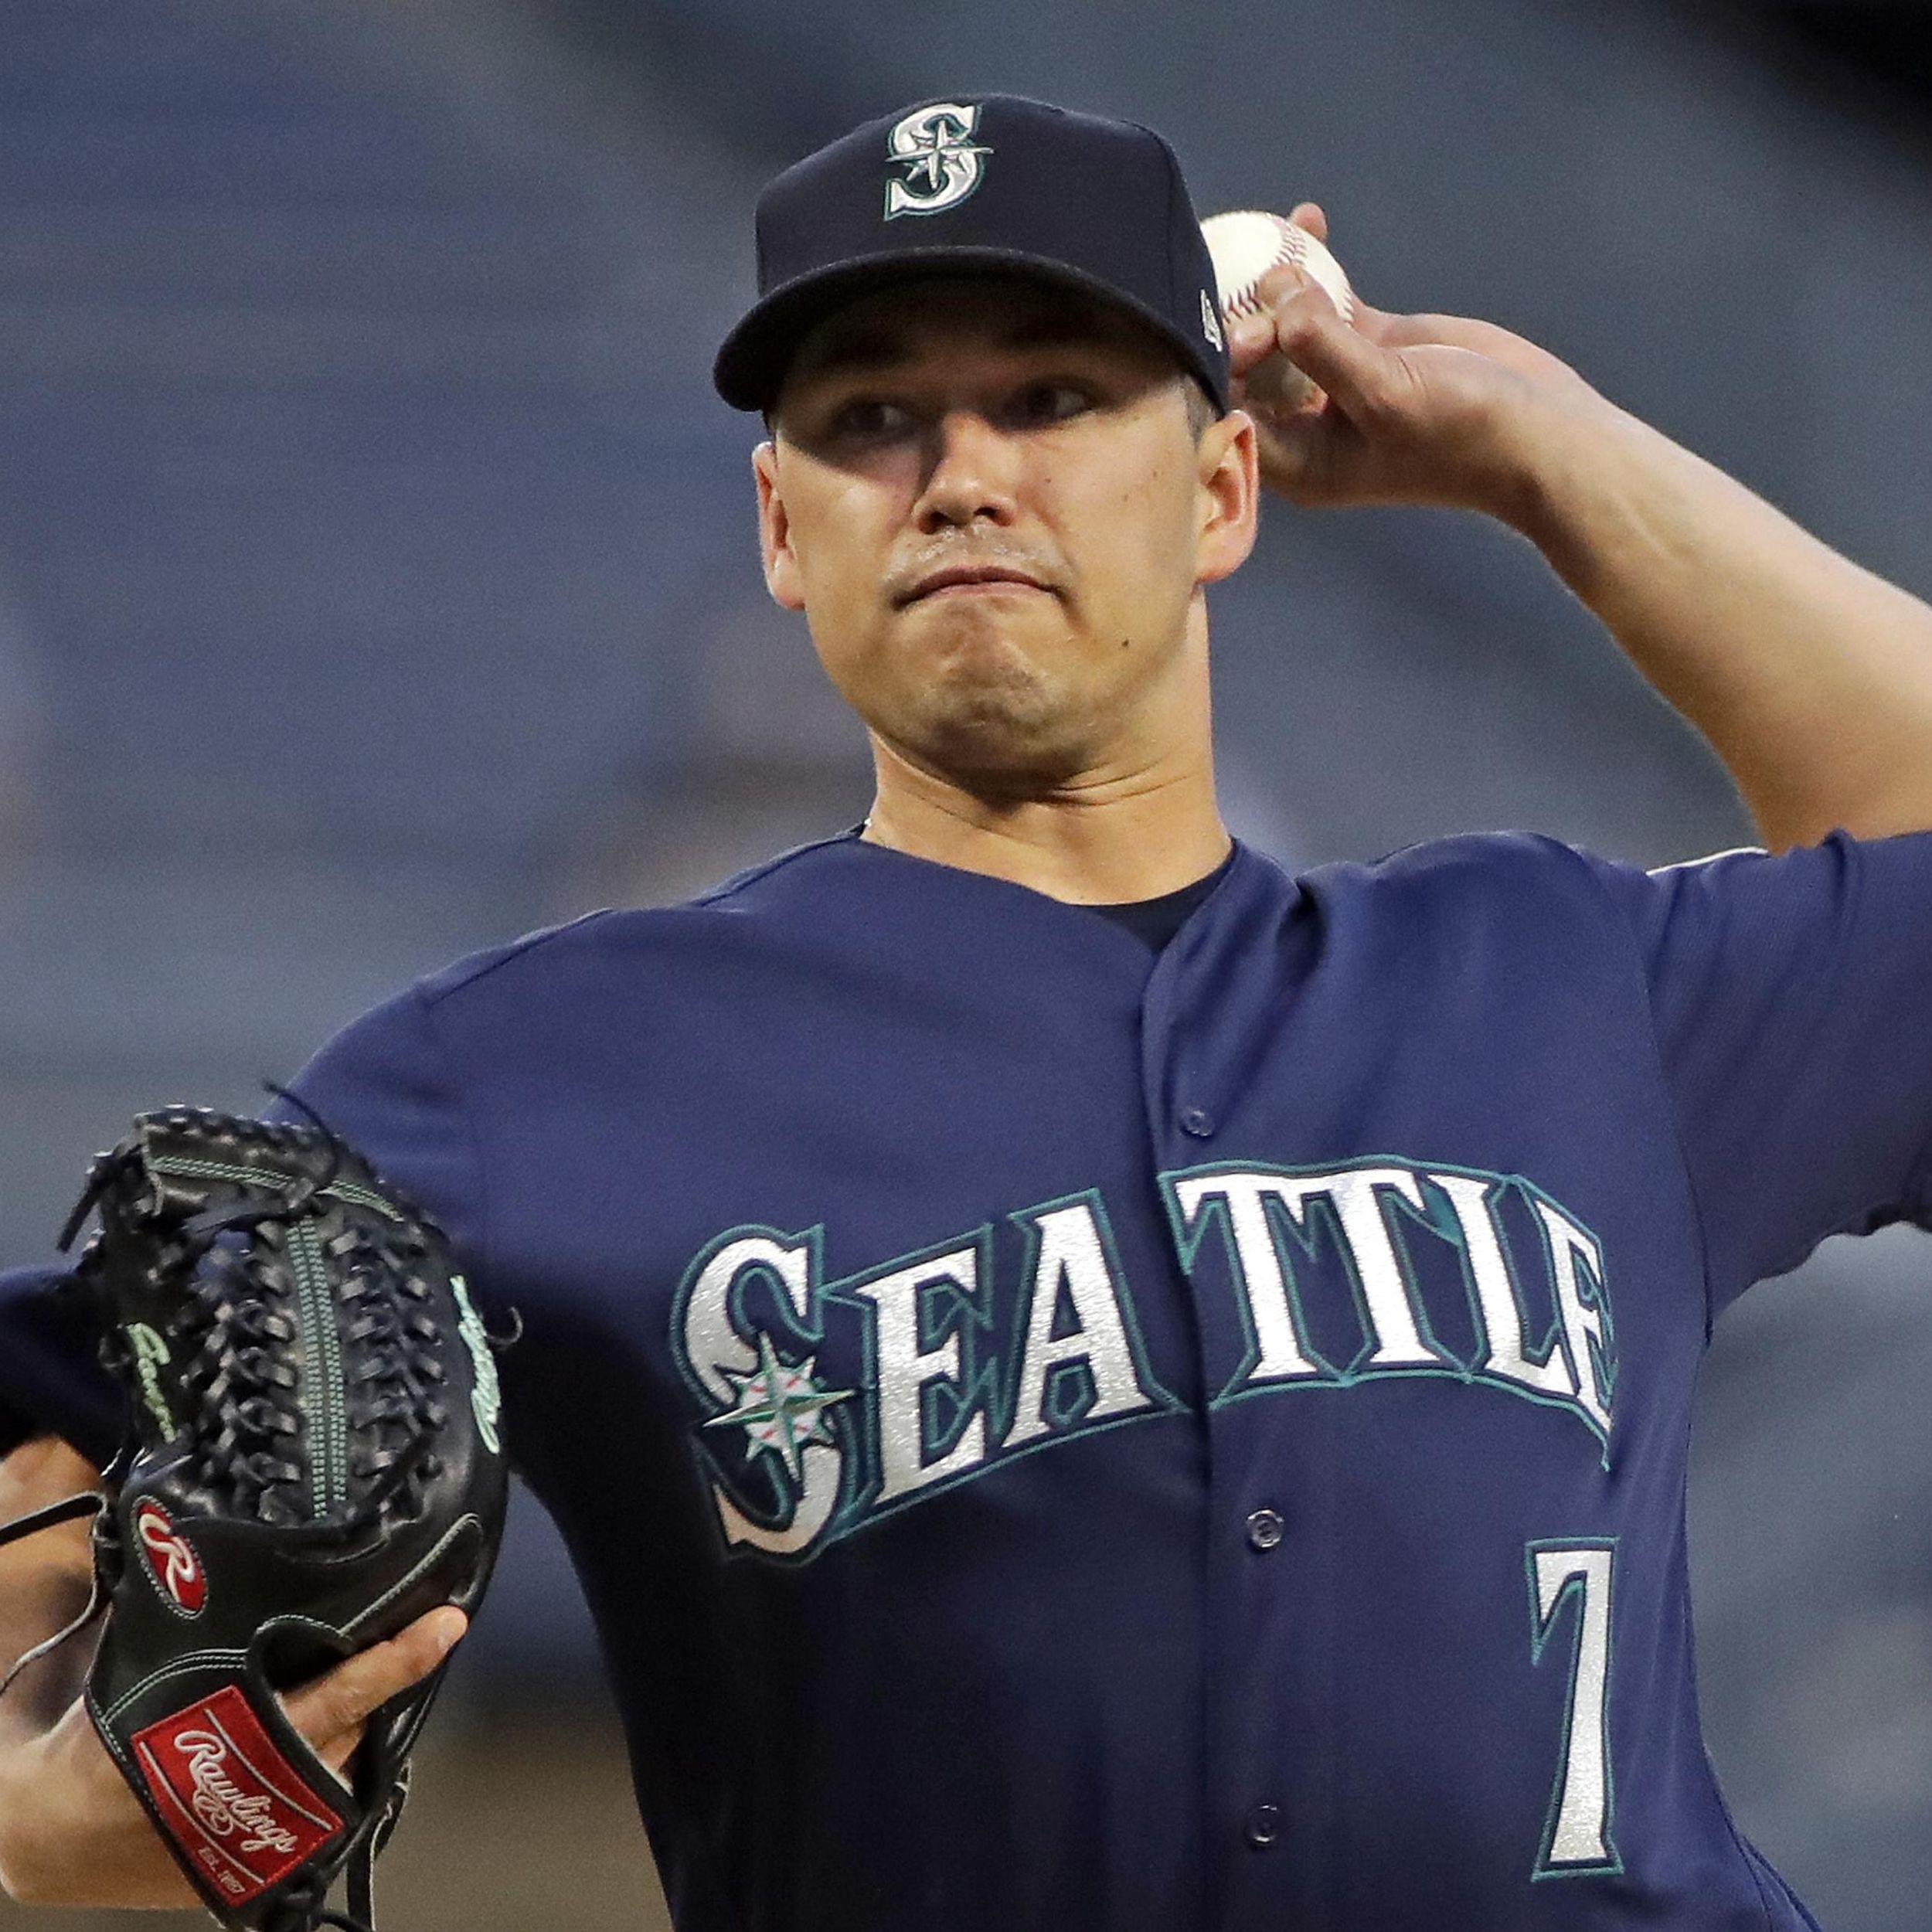 Pitcher Marco Gonzales central figure in Mariners rebuild